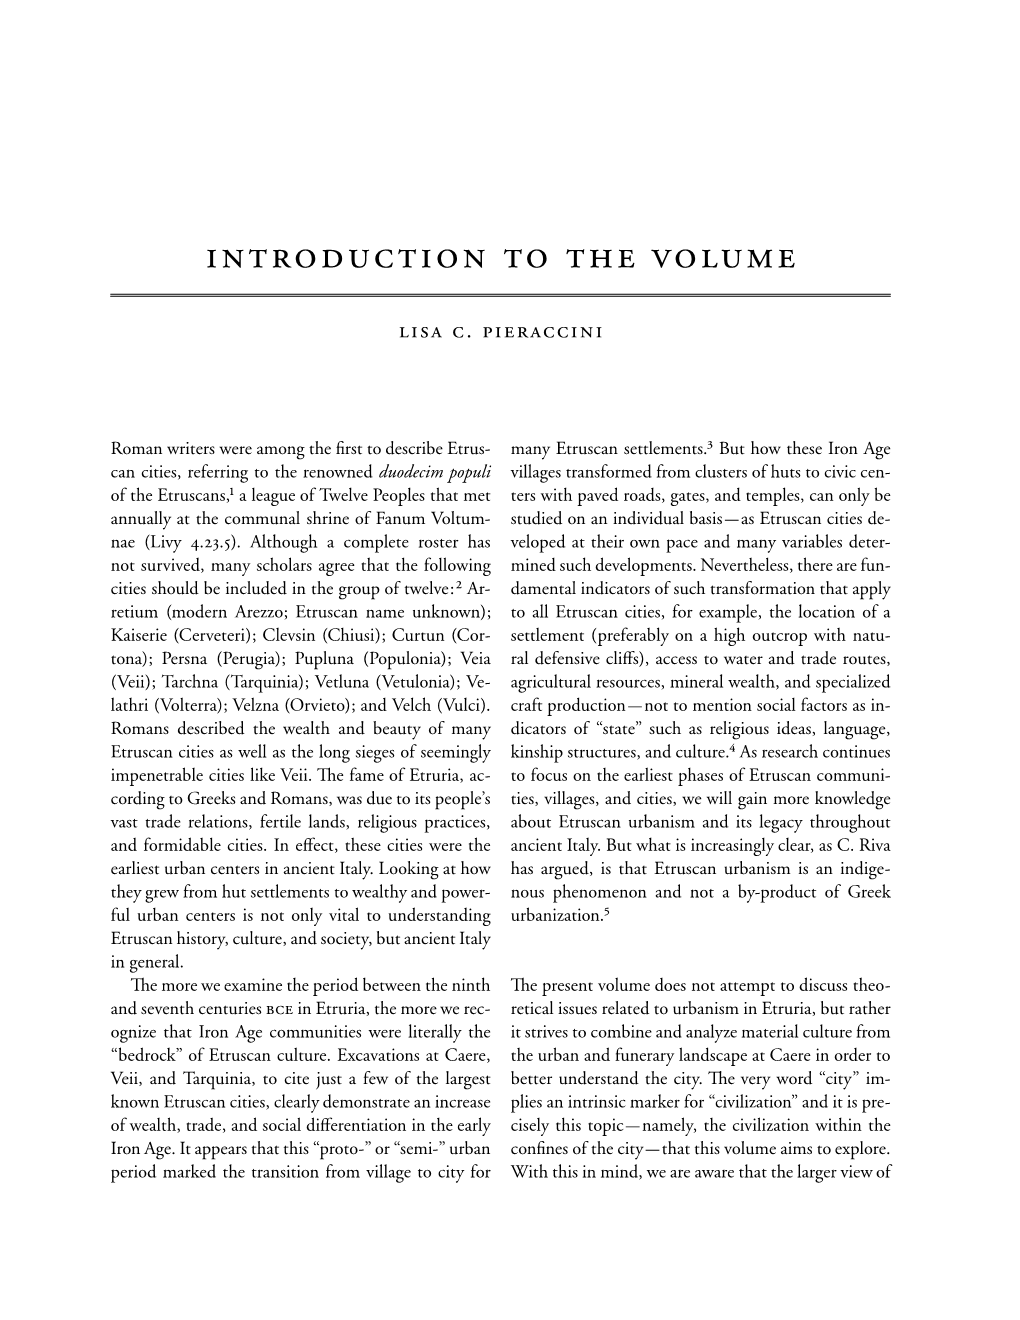 Introduction to the Volume